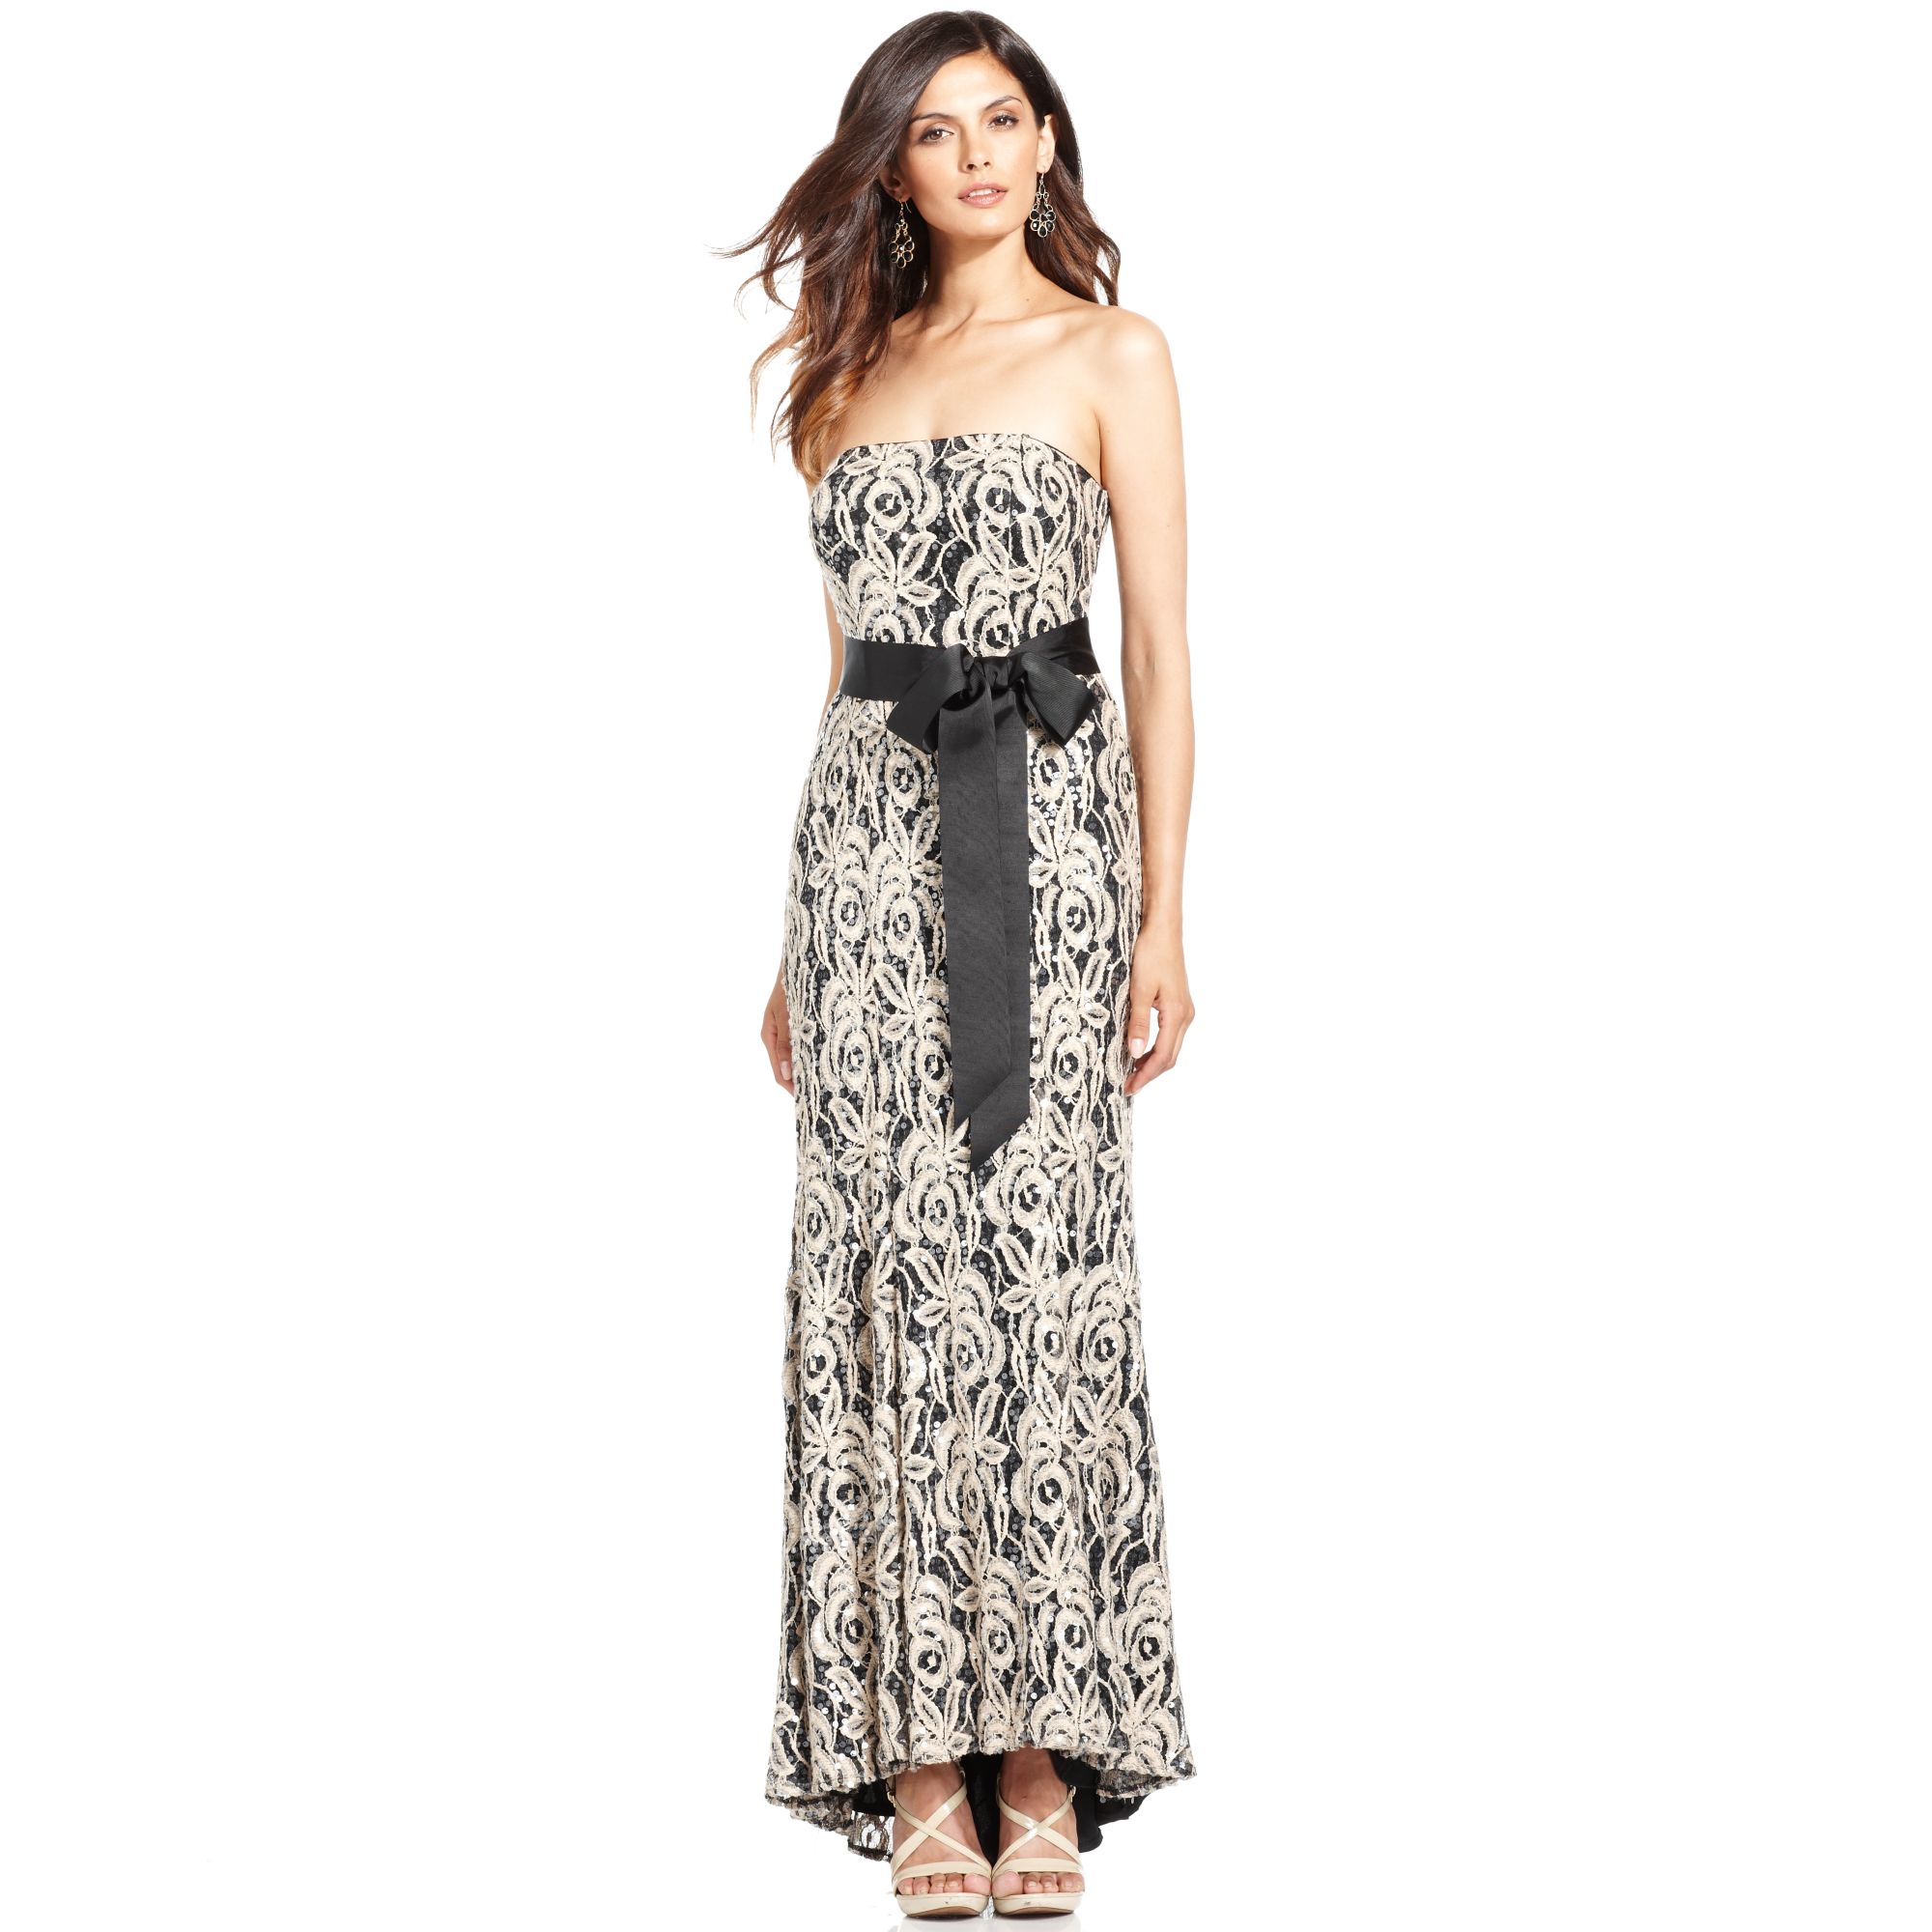 Lyst - Betsy & Adam Betsy Adam Dress Strapless Sequin Lace Gown in Metallic